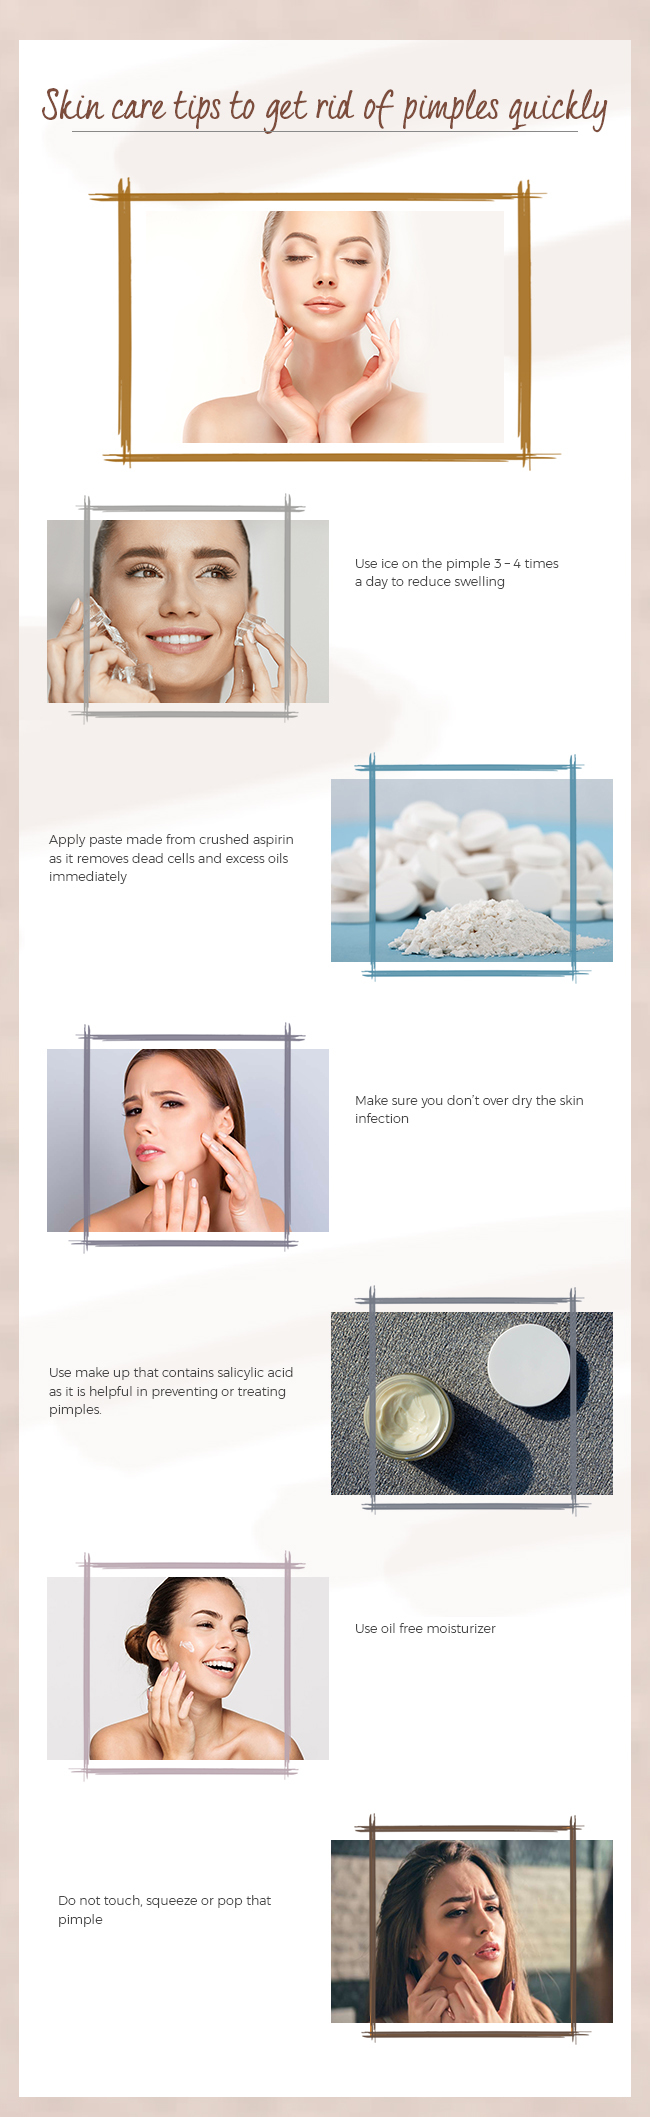 Skin_care_tips_to_get_rid_of_pimples_quickly